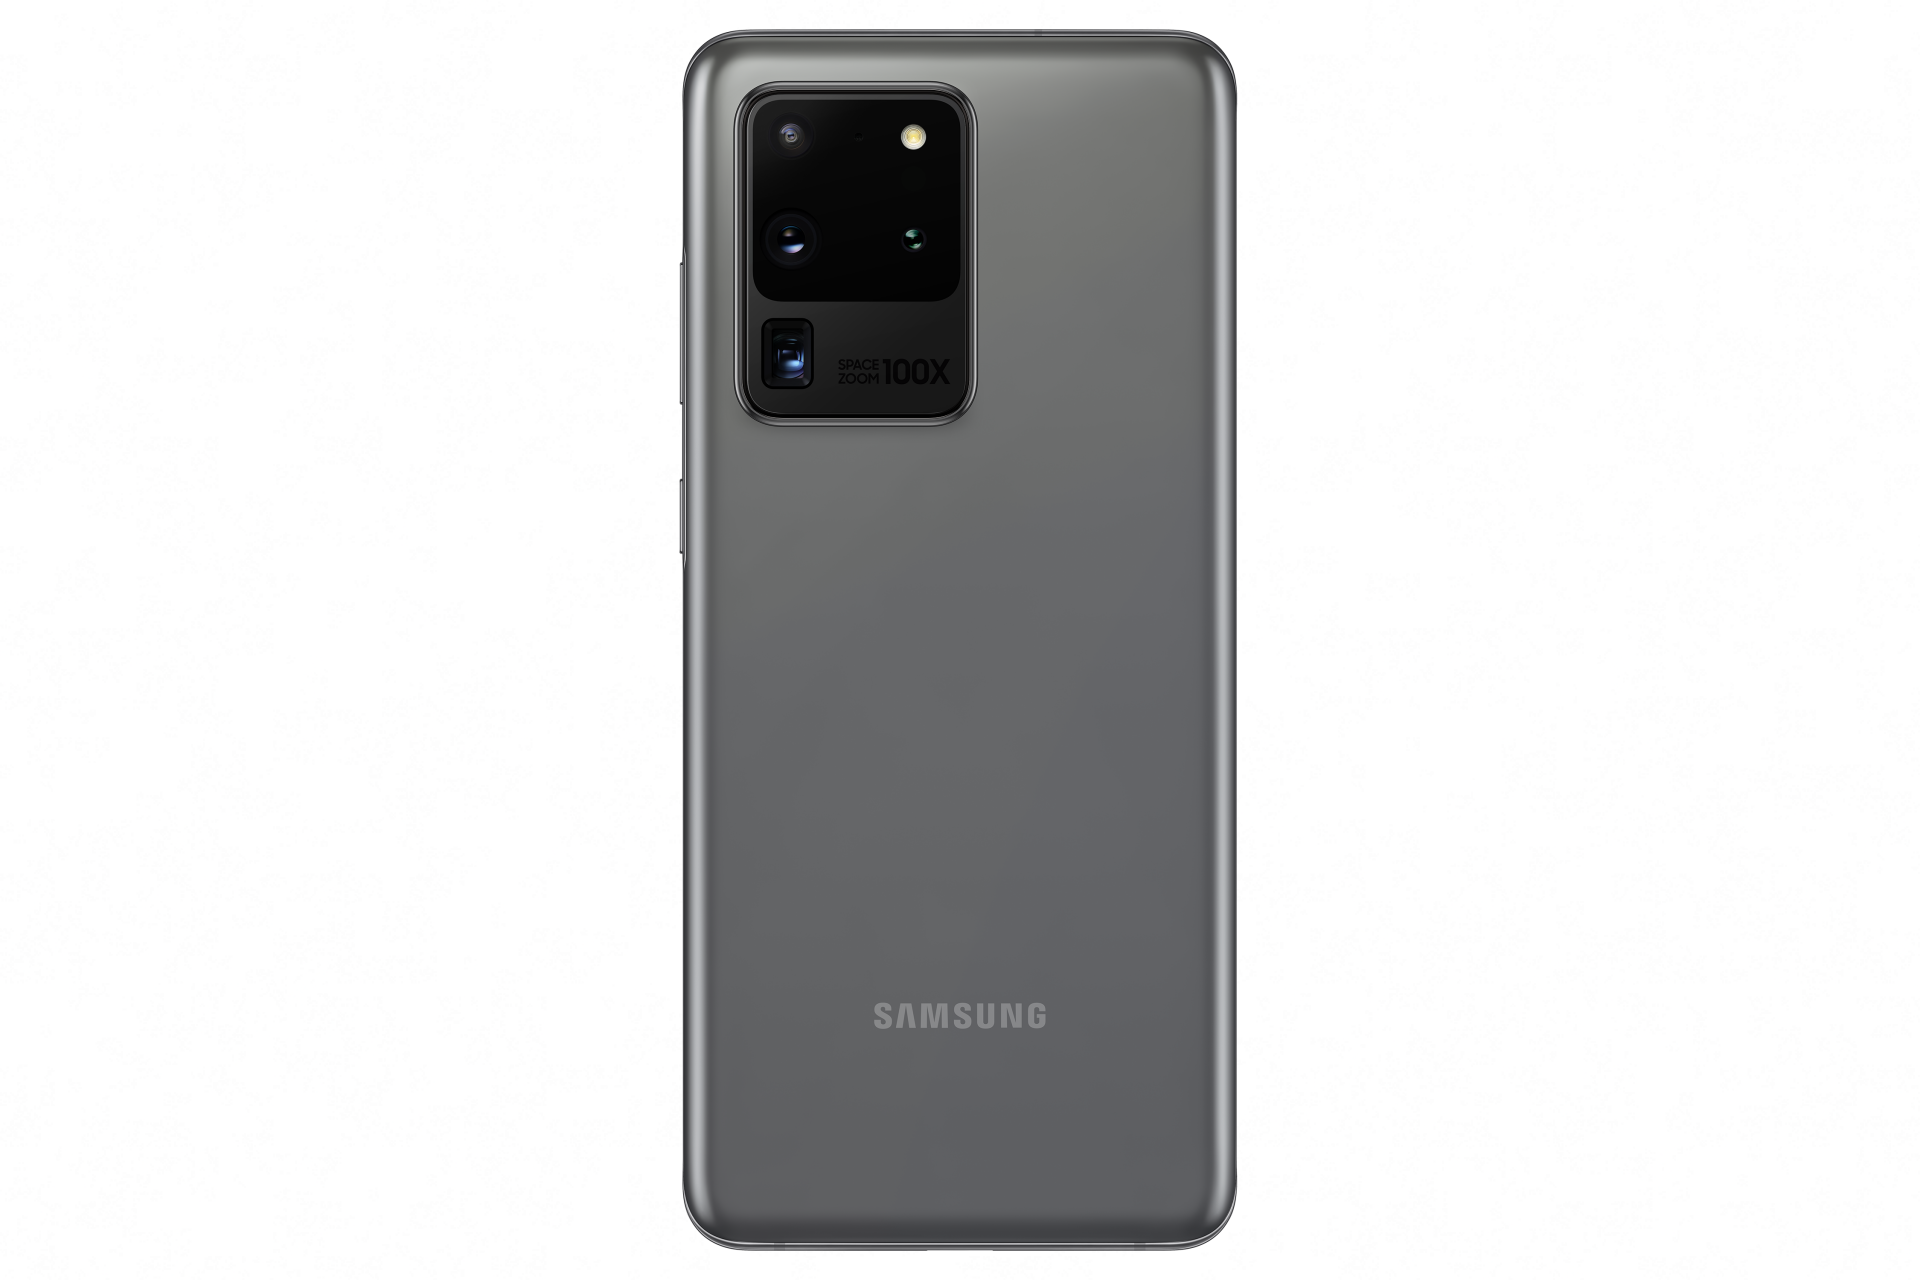 The rear cameras of the Samsung Galaxy S20 Ultra 5G.